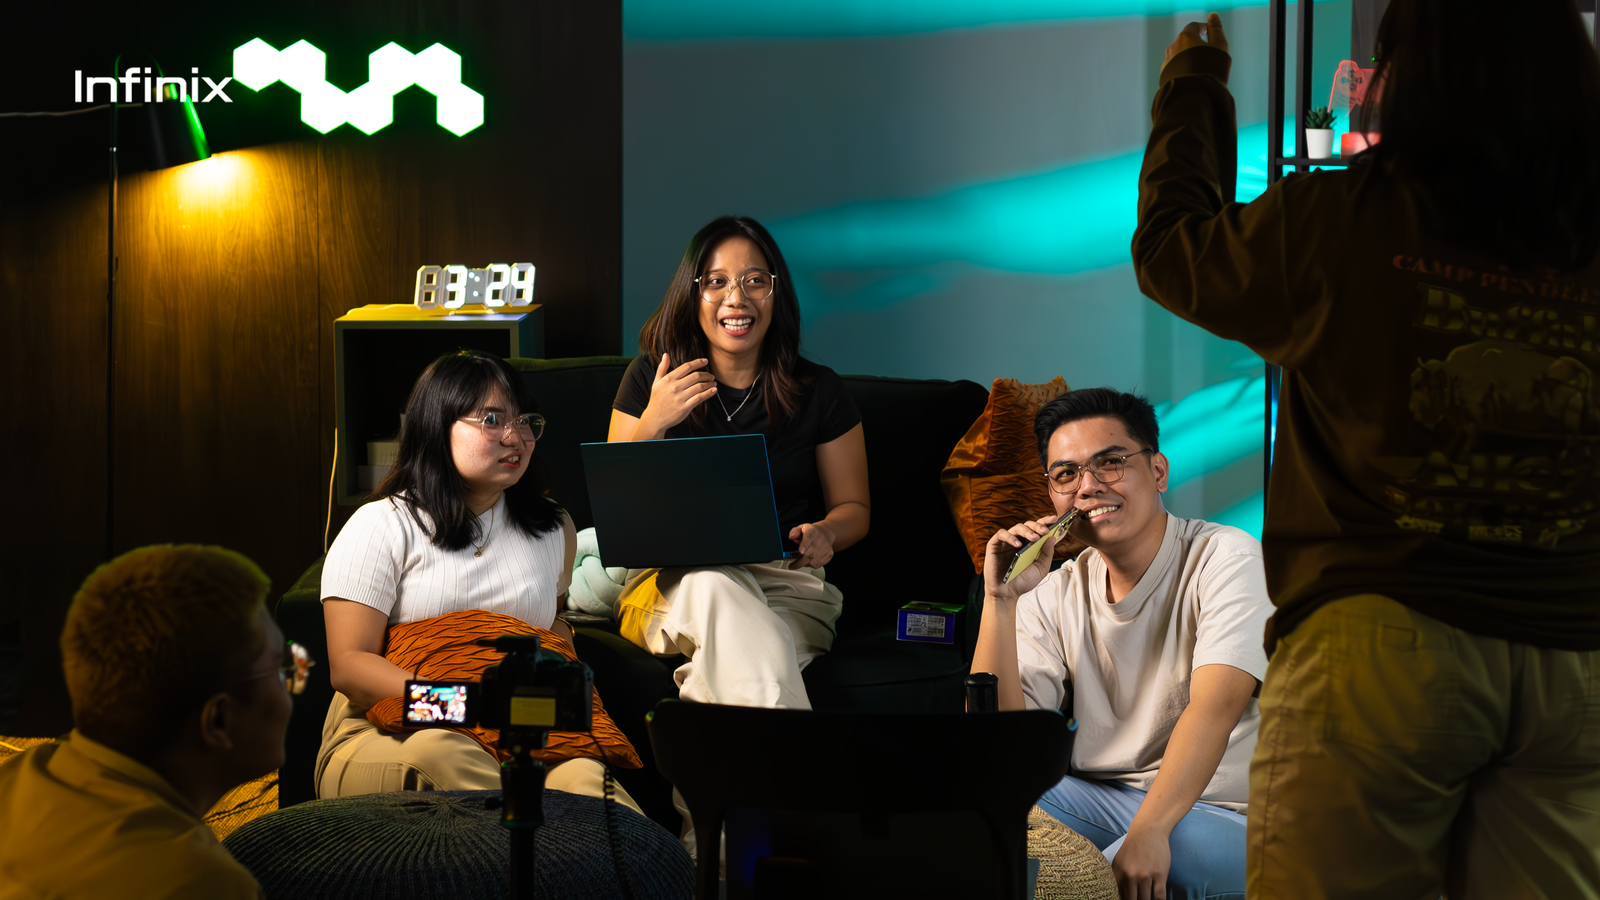 Infinix X-Press Love Story: This 5-Minute Infinix Podcast Will Bring on the Kilig this Valentine Season